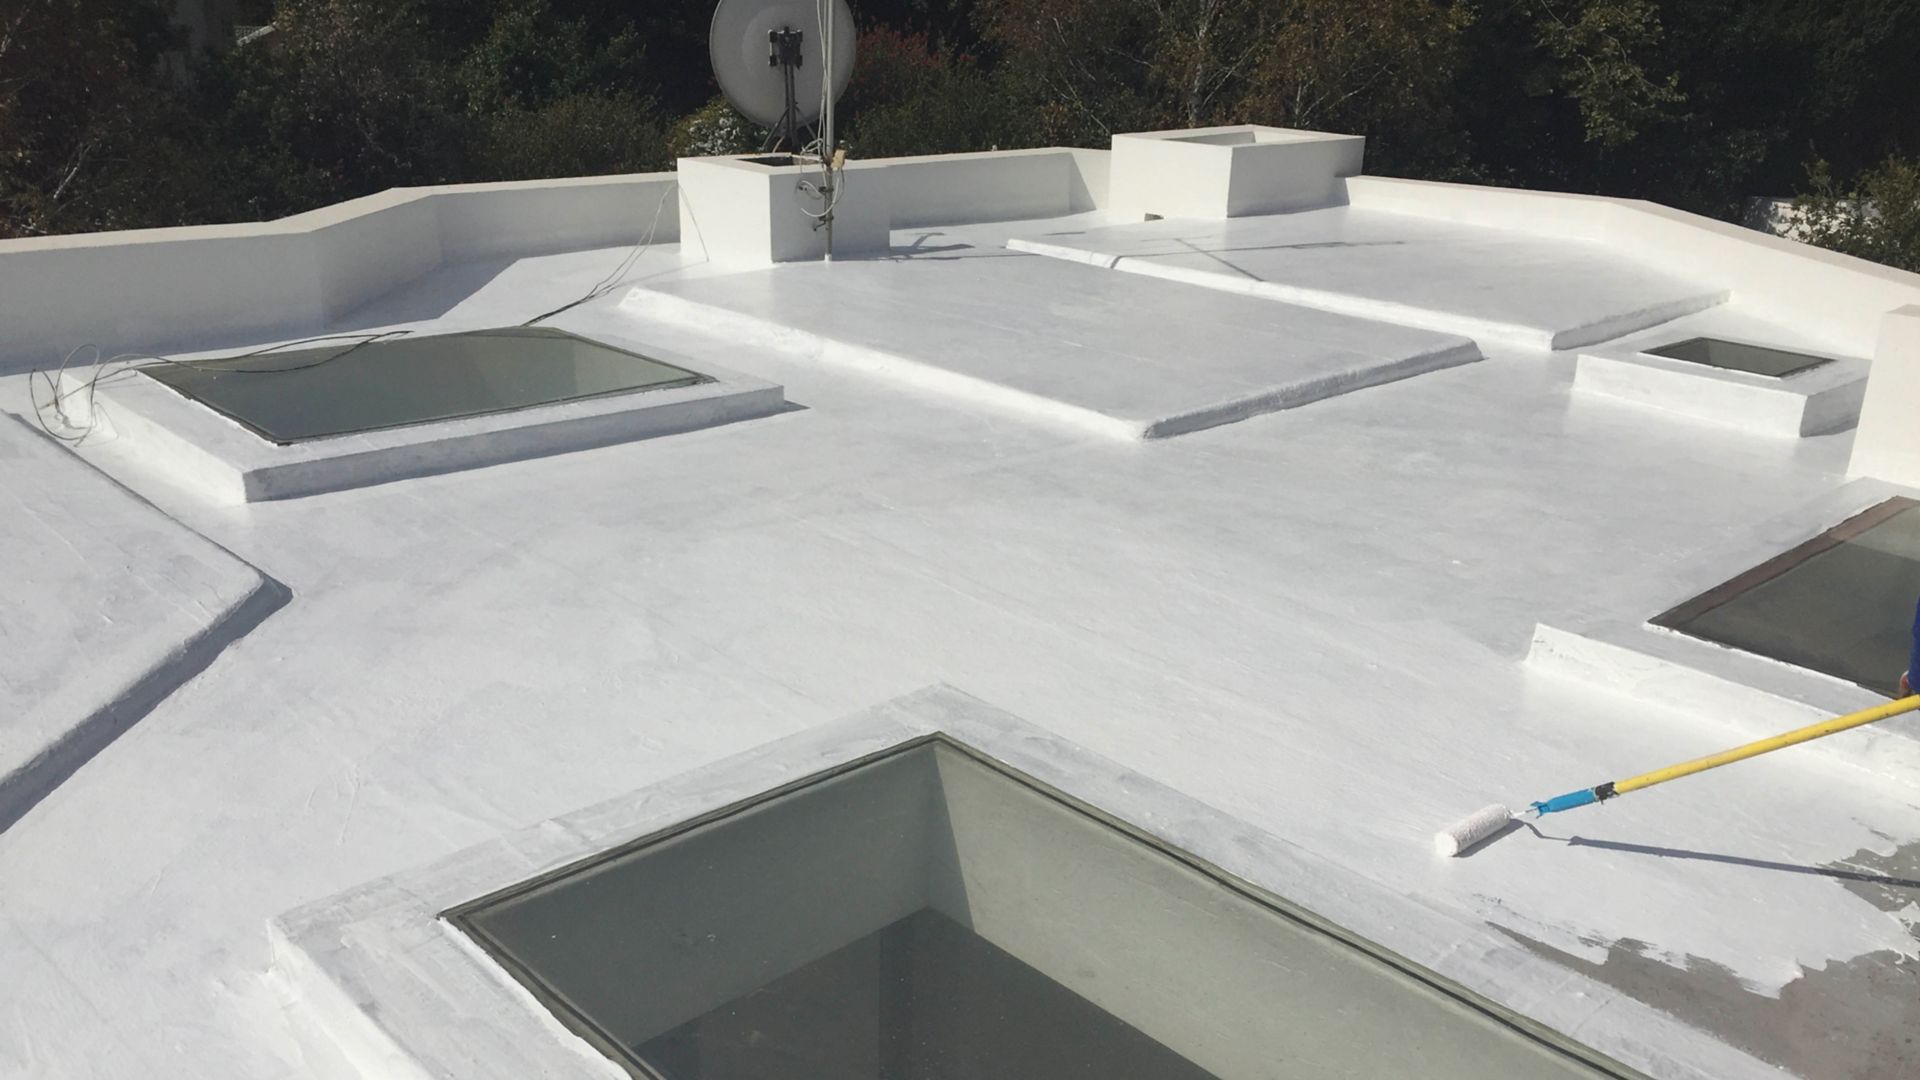 Waterproofing products for a flat roof 